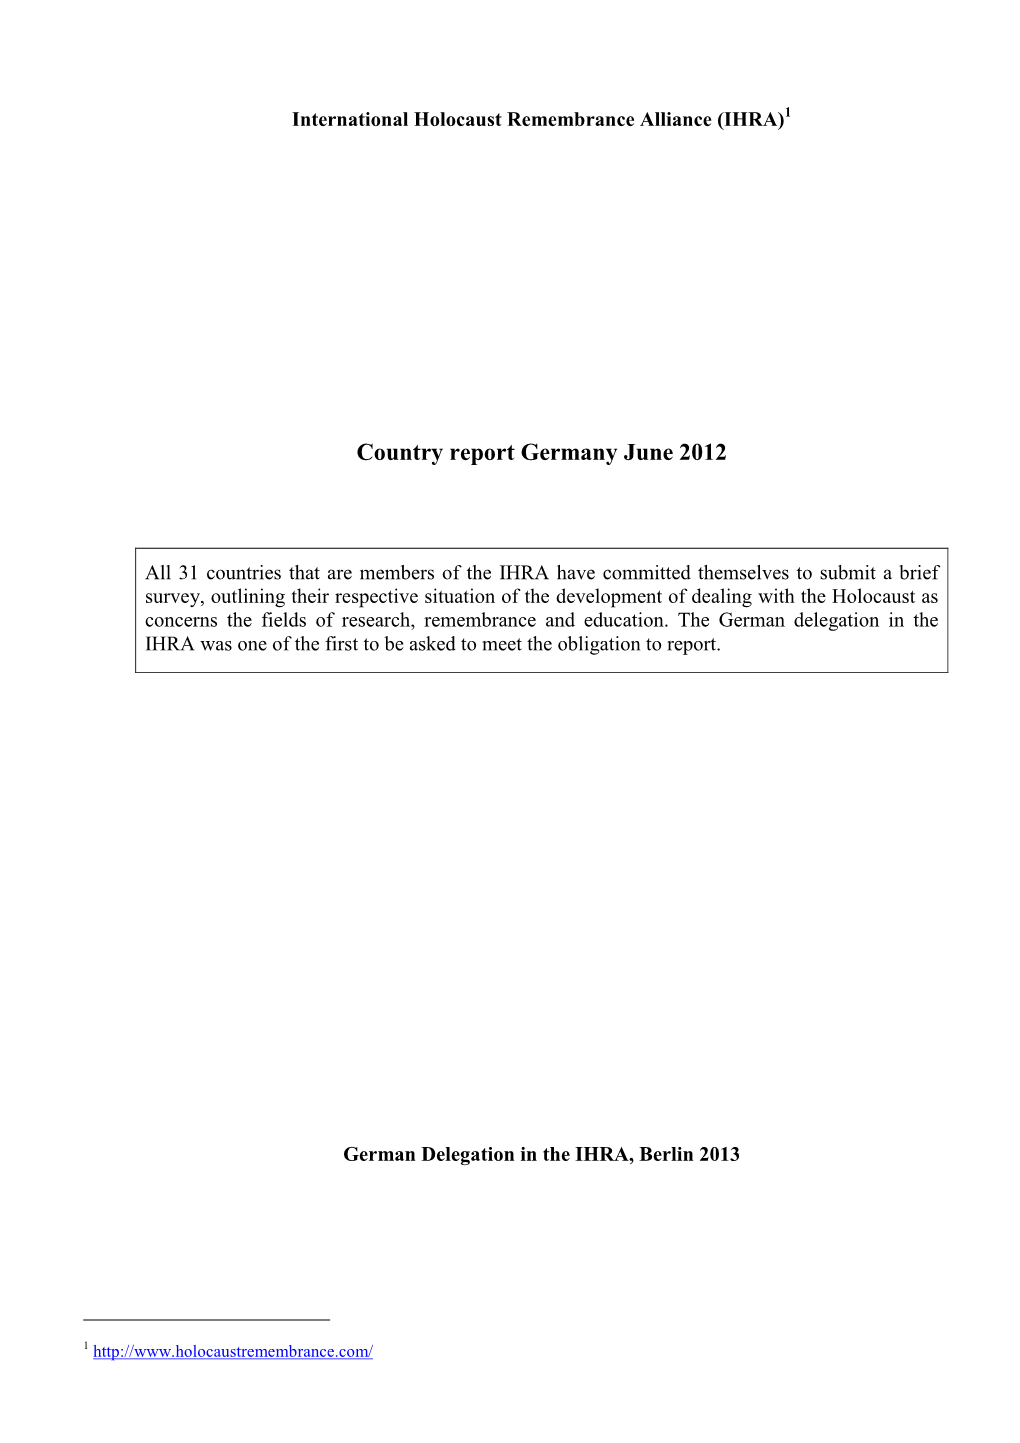 Country Report Germany June 2012